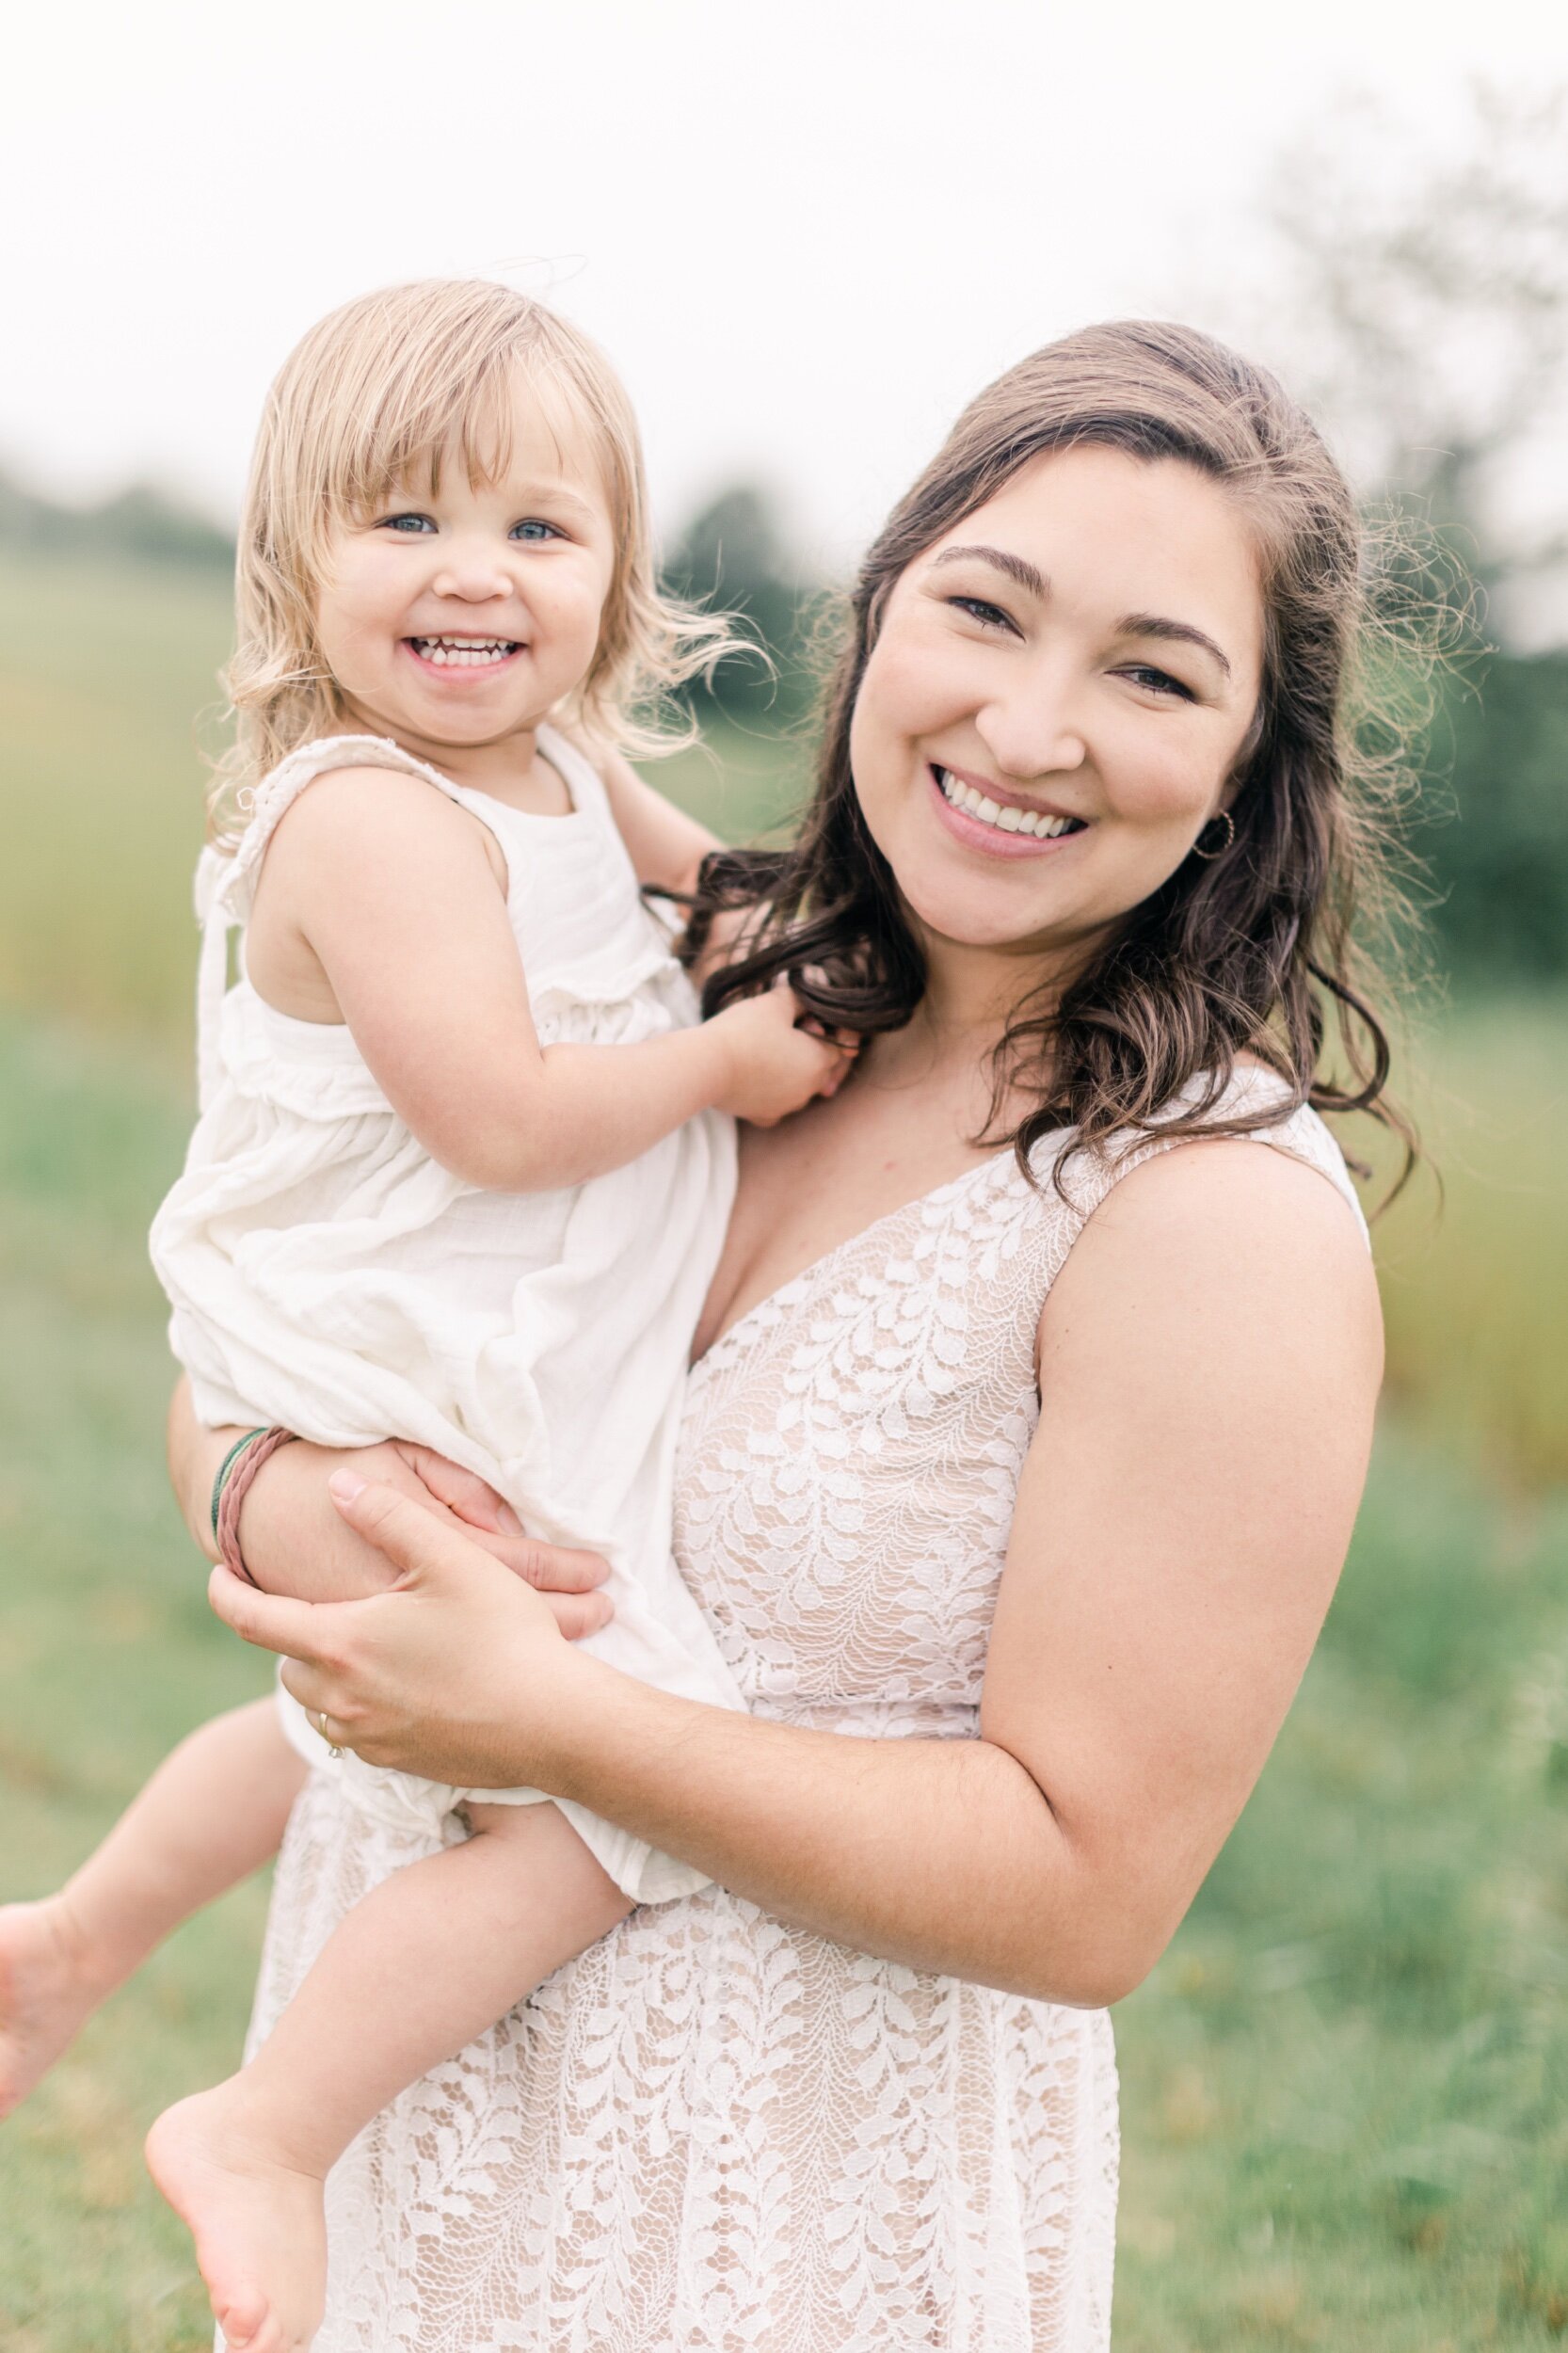 Mom with Toddler Girl - Family Photo Session